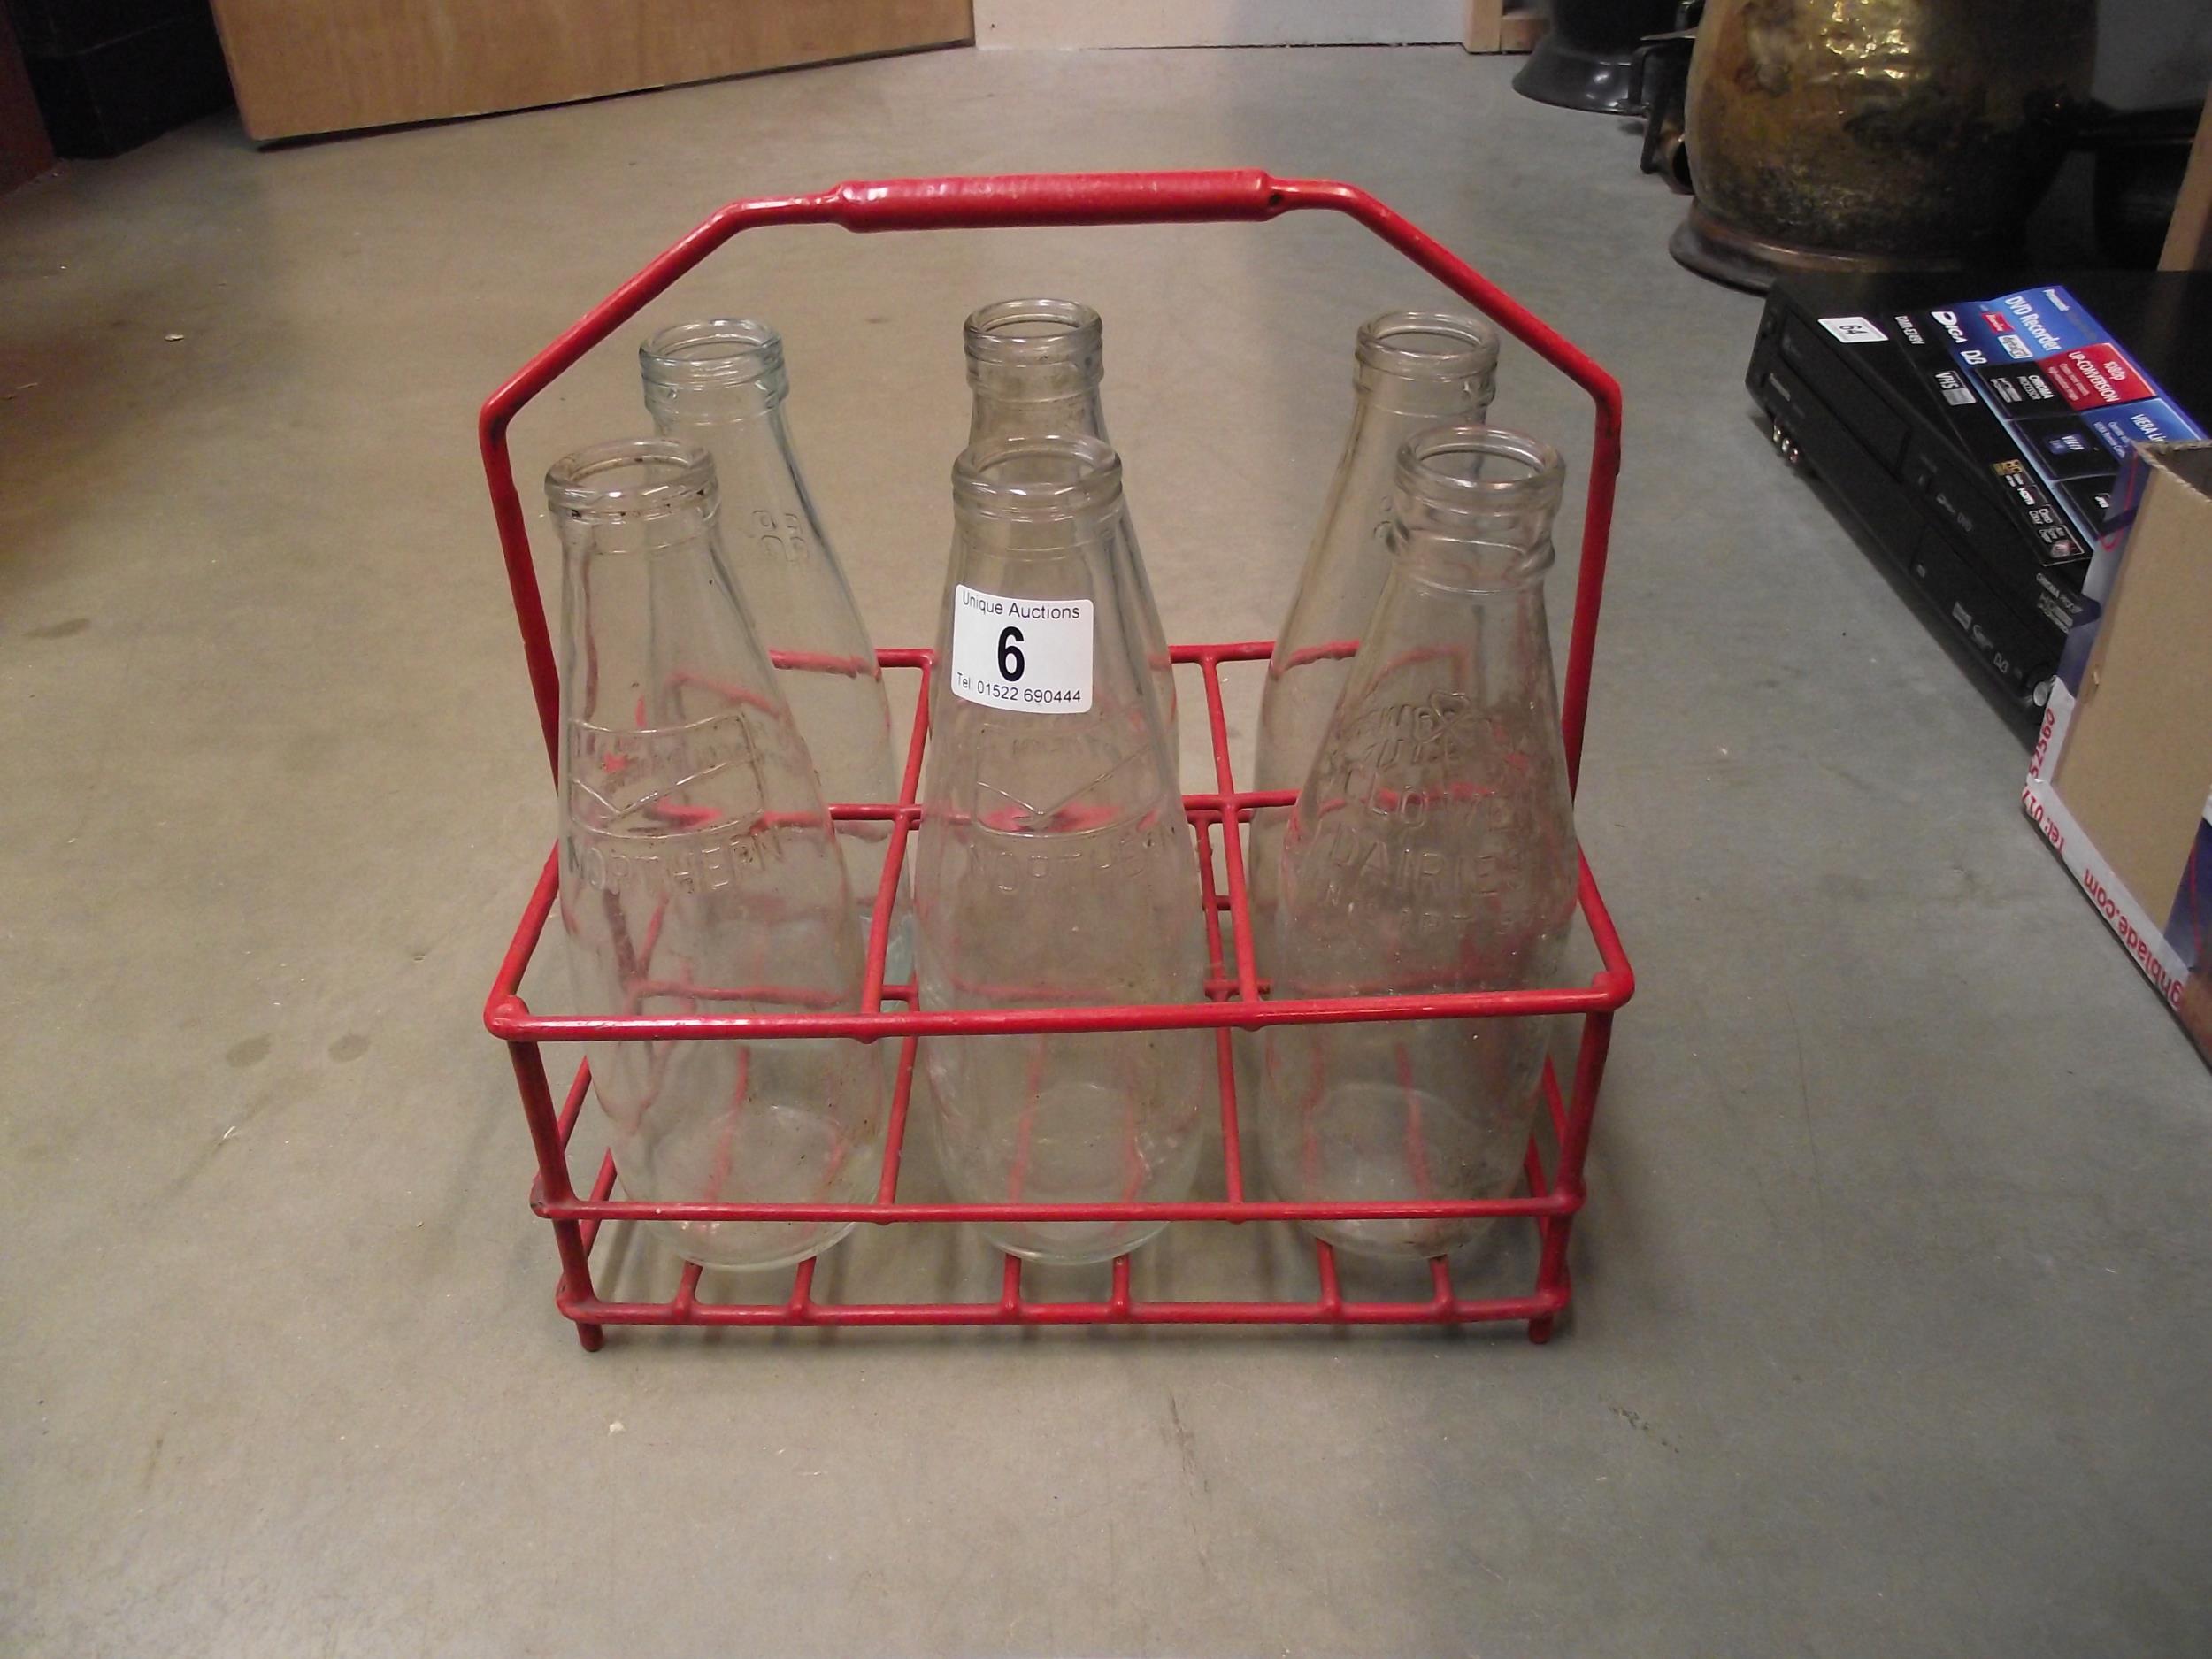 A vintage milkmans bottle basket with 6 vintage 1 pint glass milk bottles, 3 of which are Co-op, 2